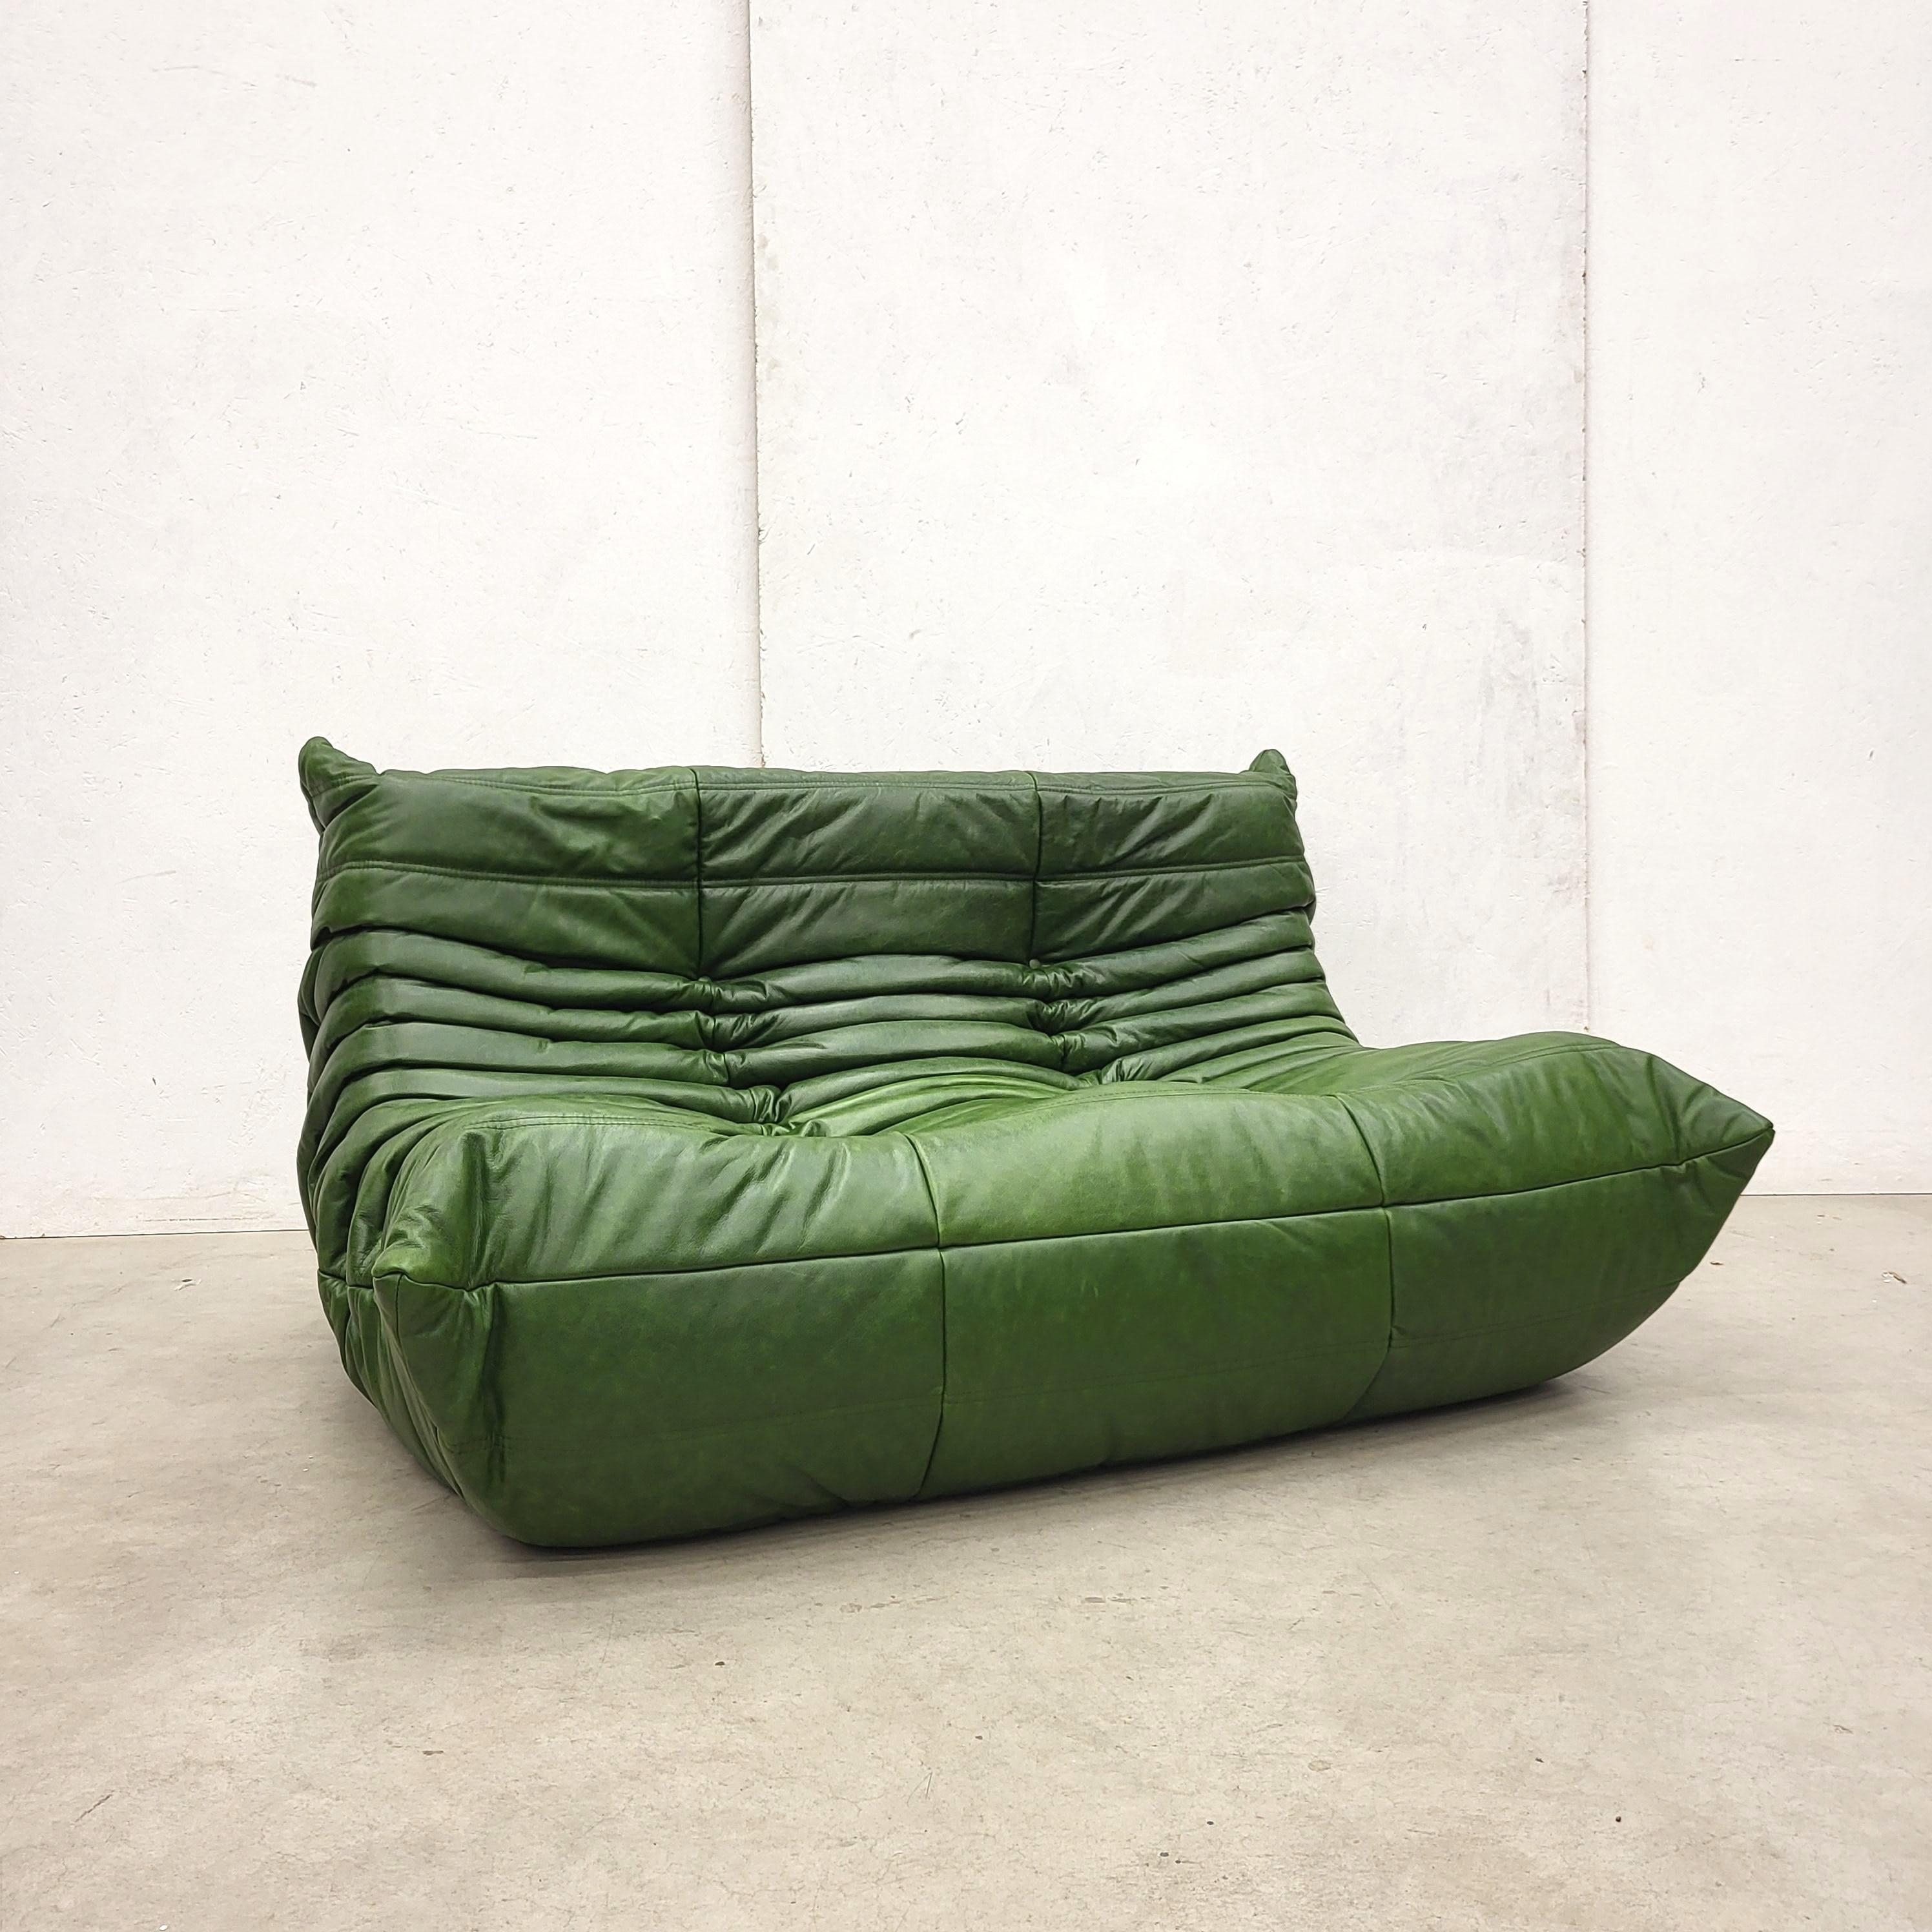 French Vintage Green Togo Seating Group Sofa by Michel Ducaroy for Ligne Roset 1973